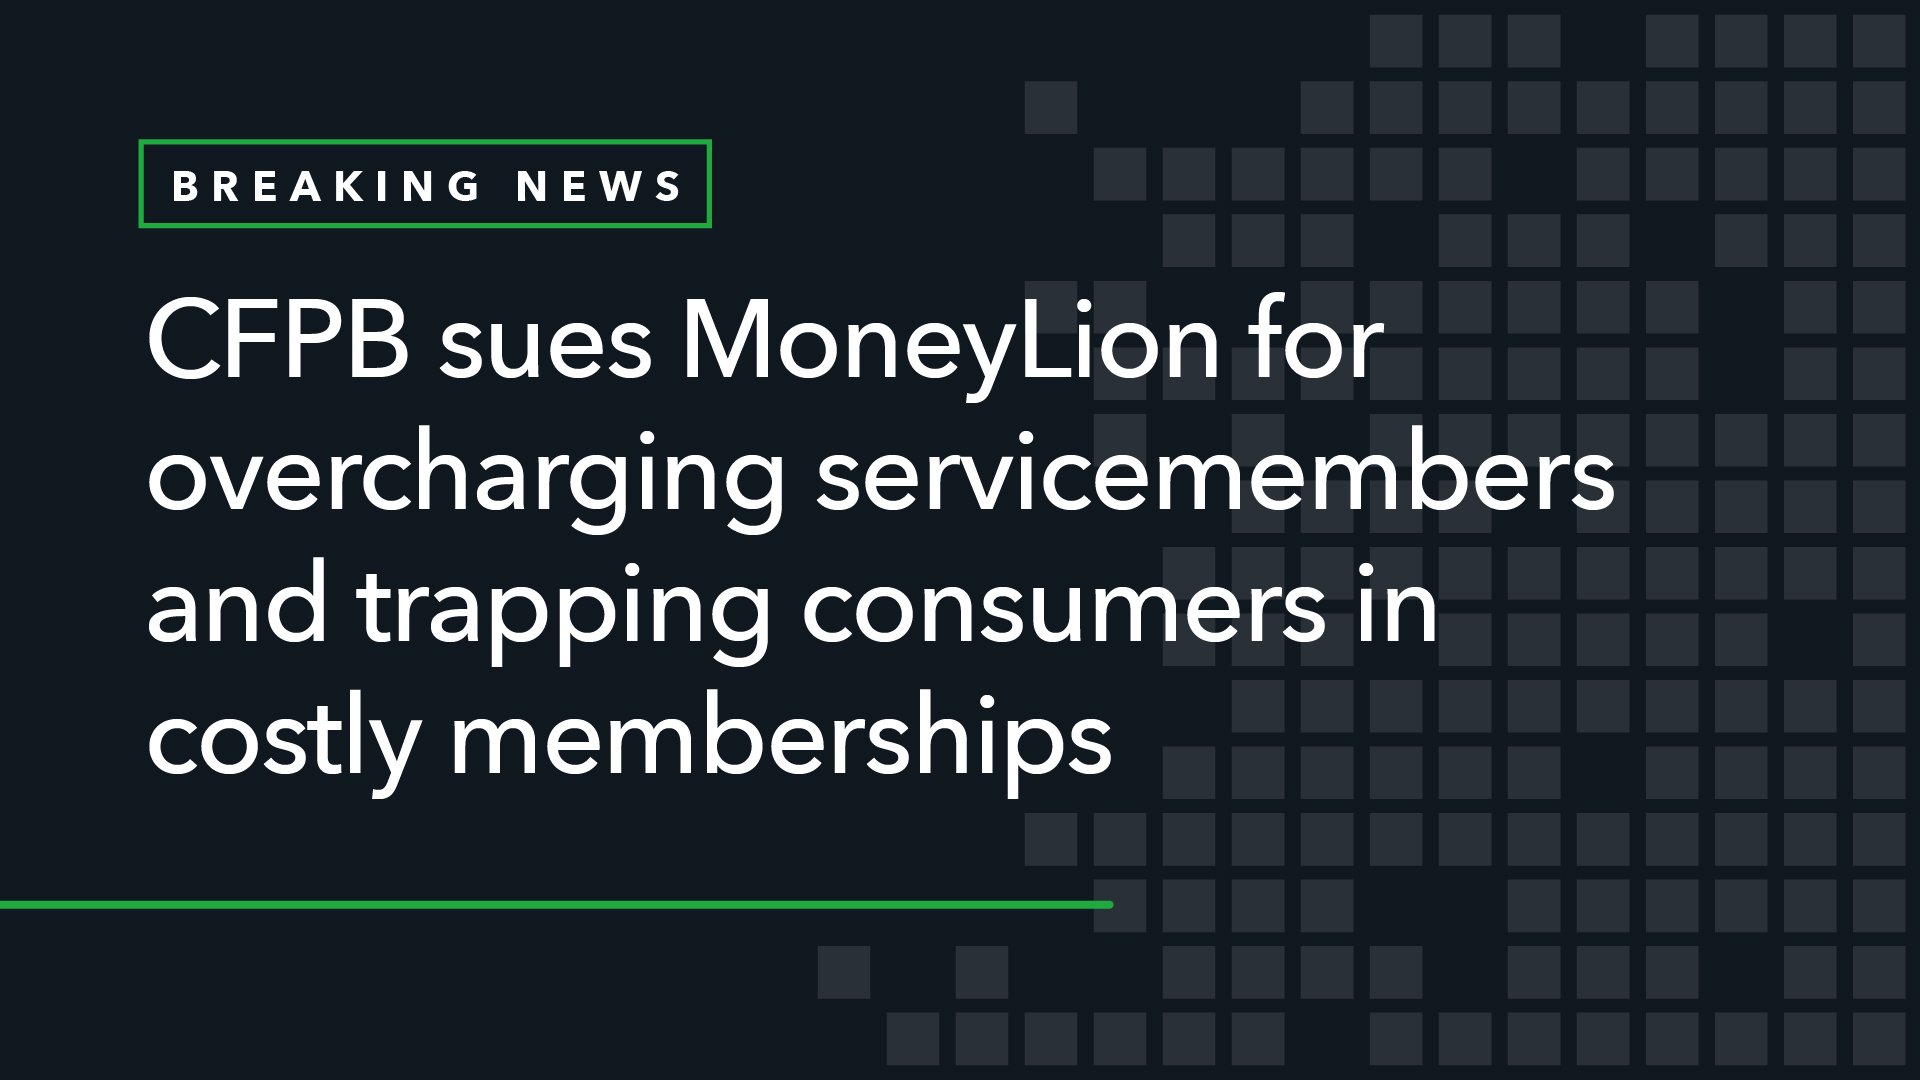 CFPB Sues MoneyLion for Overcharging Servicemembers and Trapping Consumers in Costly Memberships